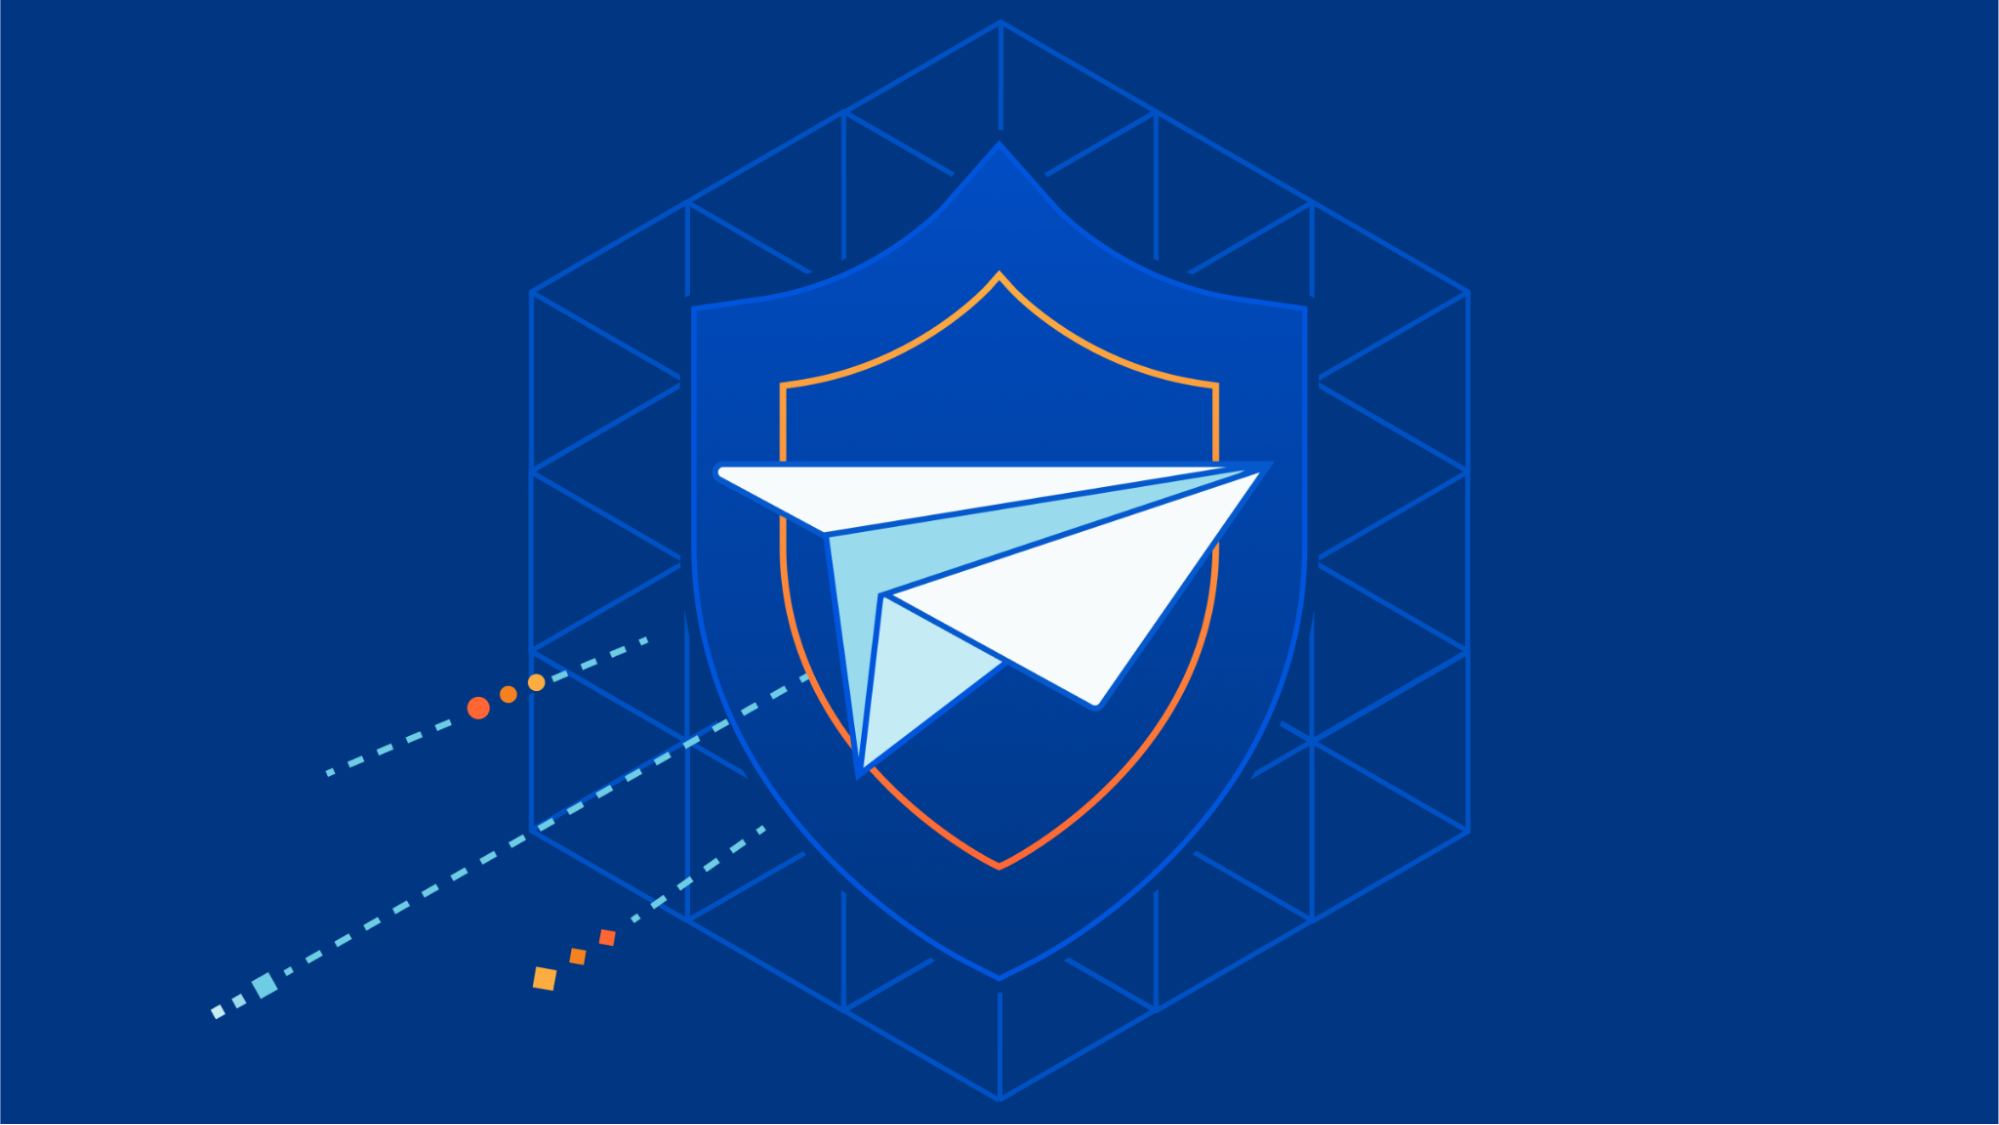 Cloudflare partners with KnowBe4 to equip organizations with real-time security coaching to avoid phishing attacks 